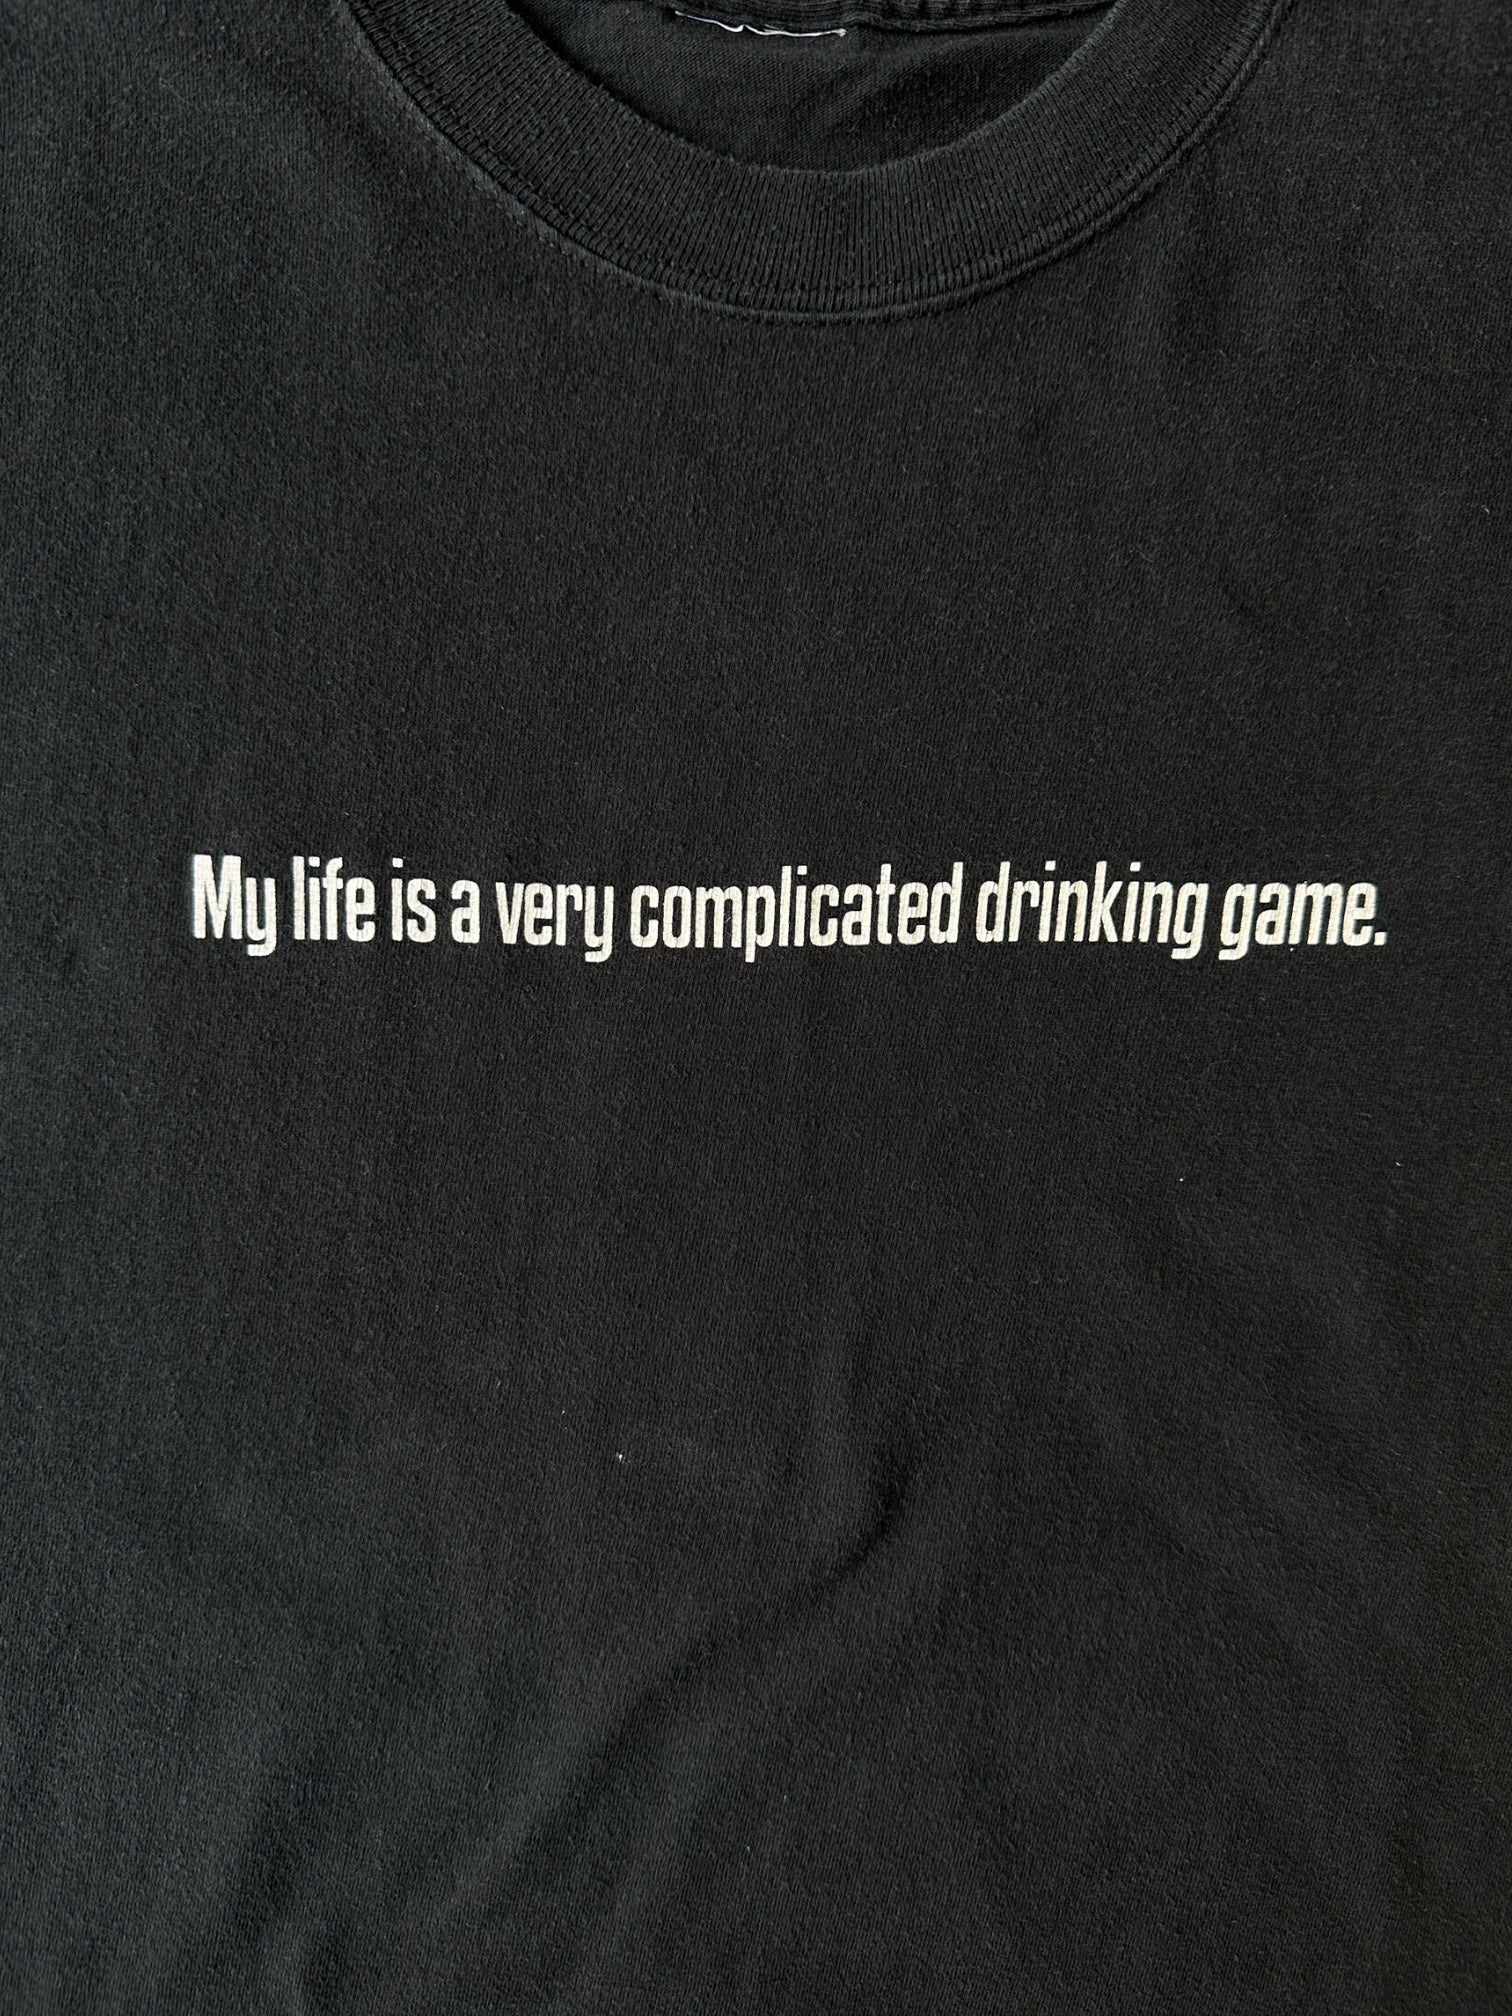 Vintage Complicated Drinking Game T-Shirt - Large